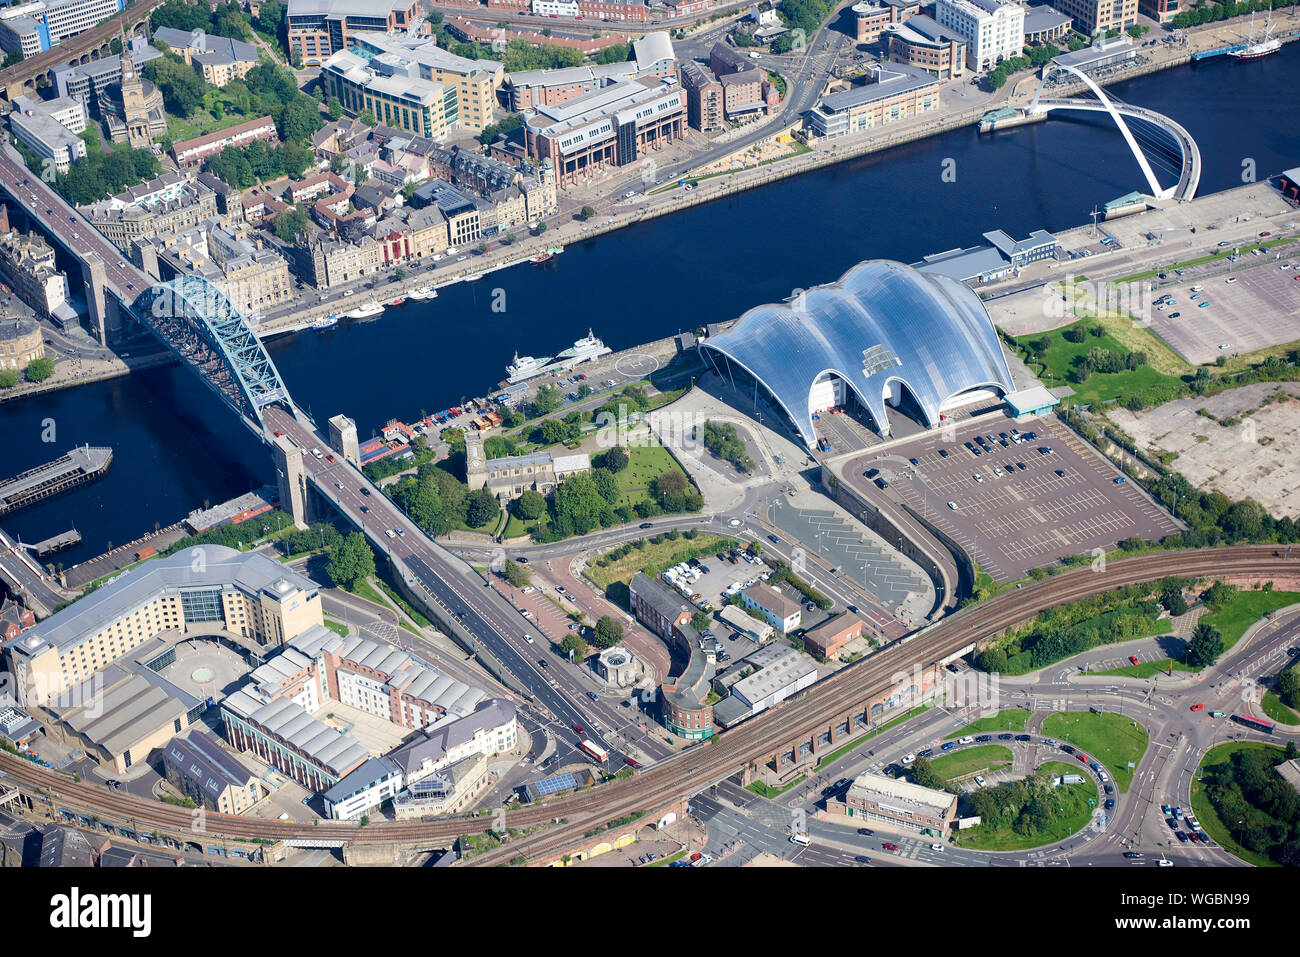 An aerial view of the riverside at Newcastle upon Tyne, city centre, North East  England, UK, showing the Sage Stock Photo